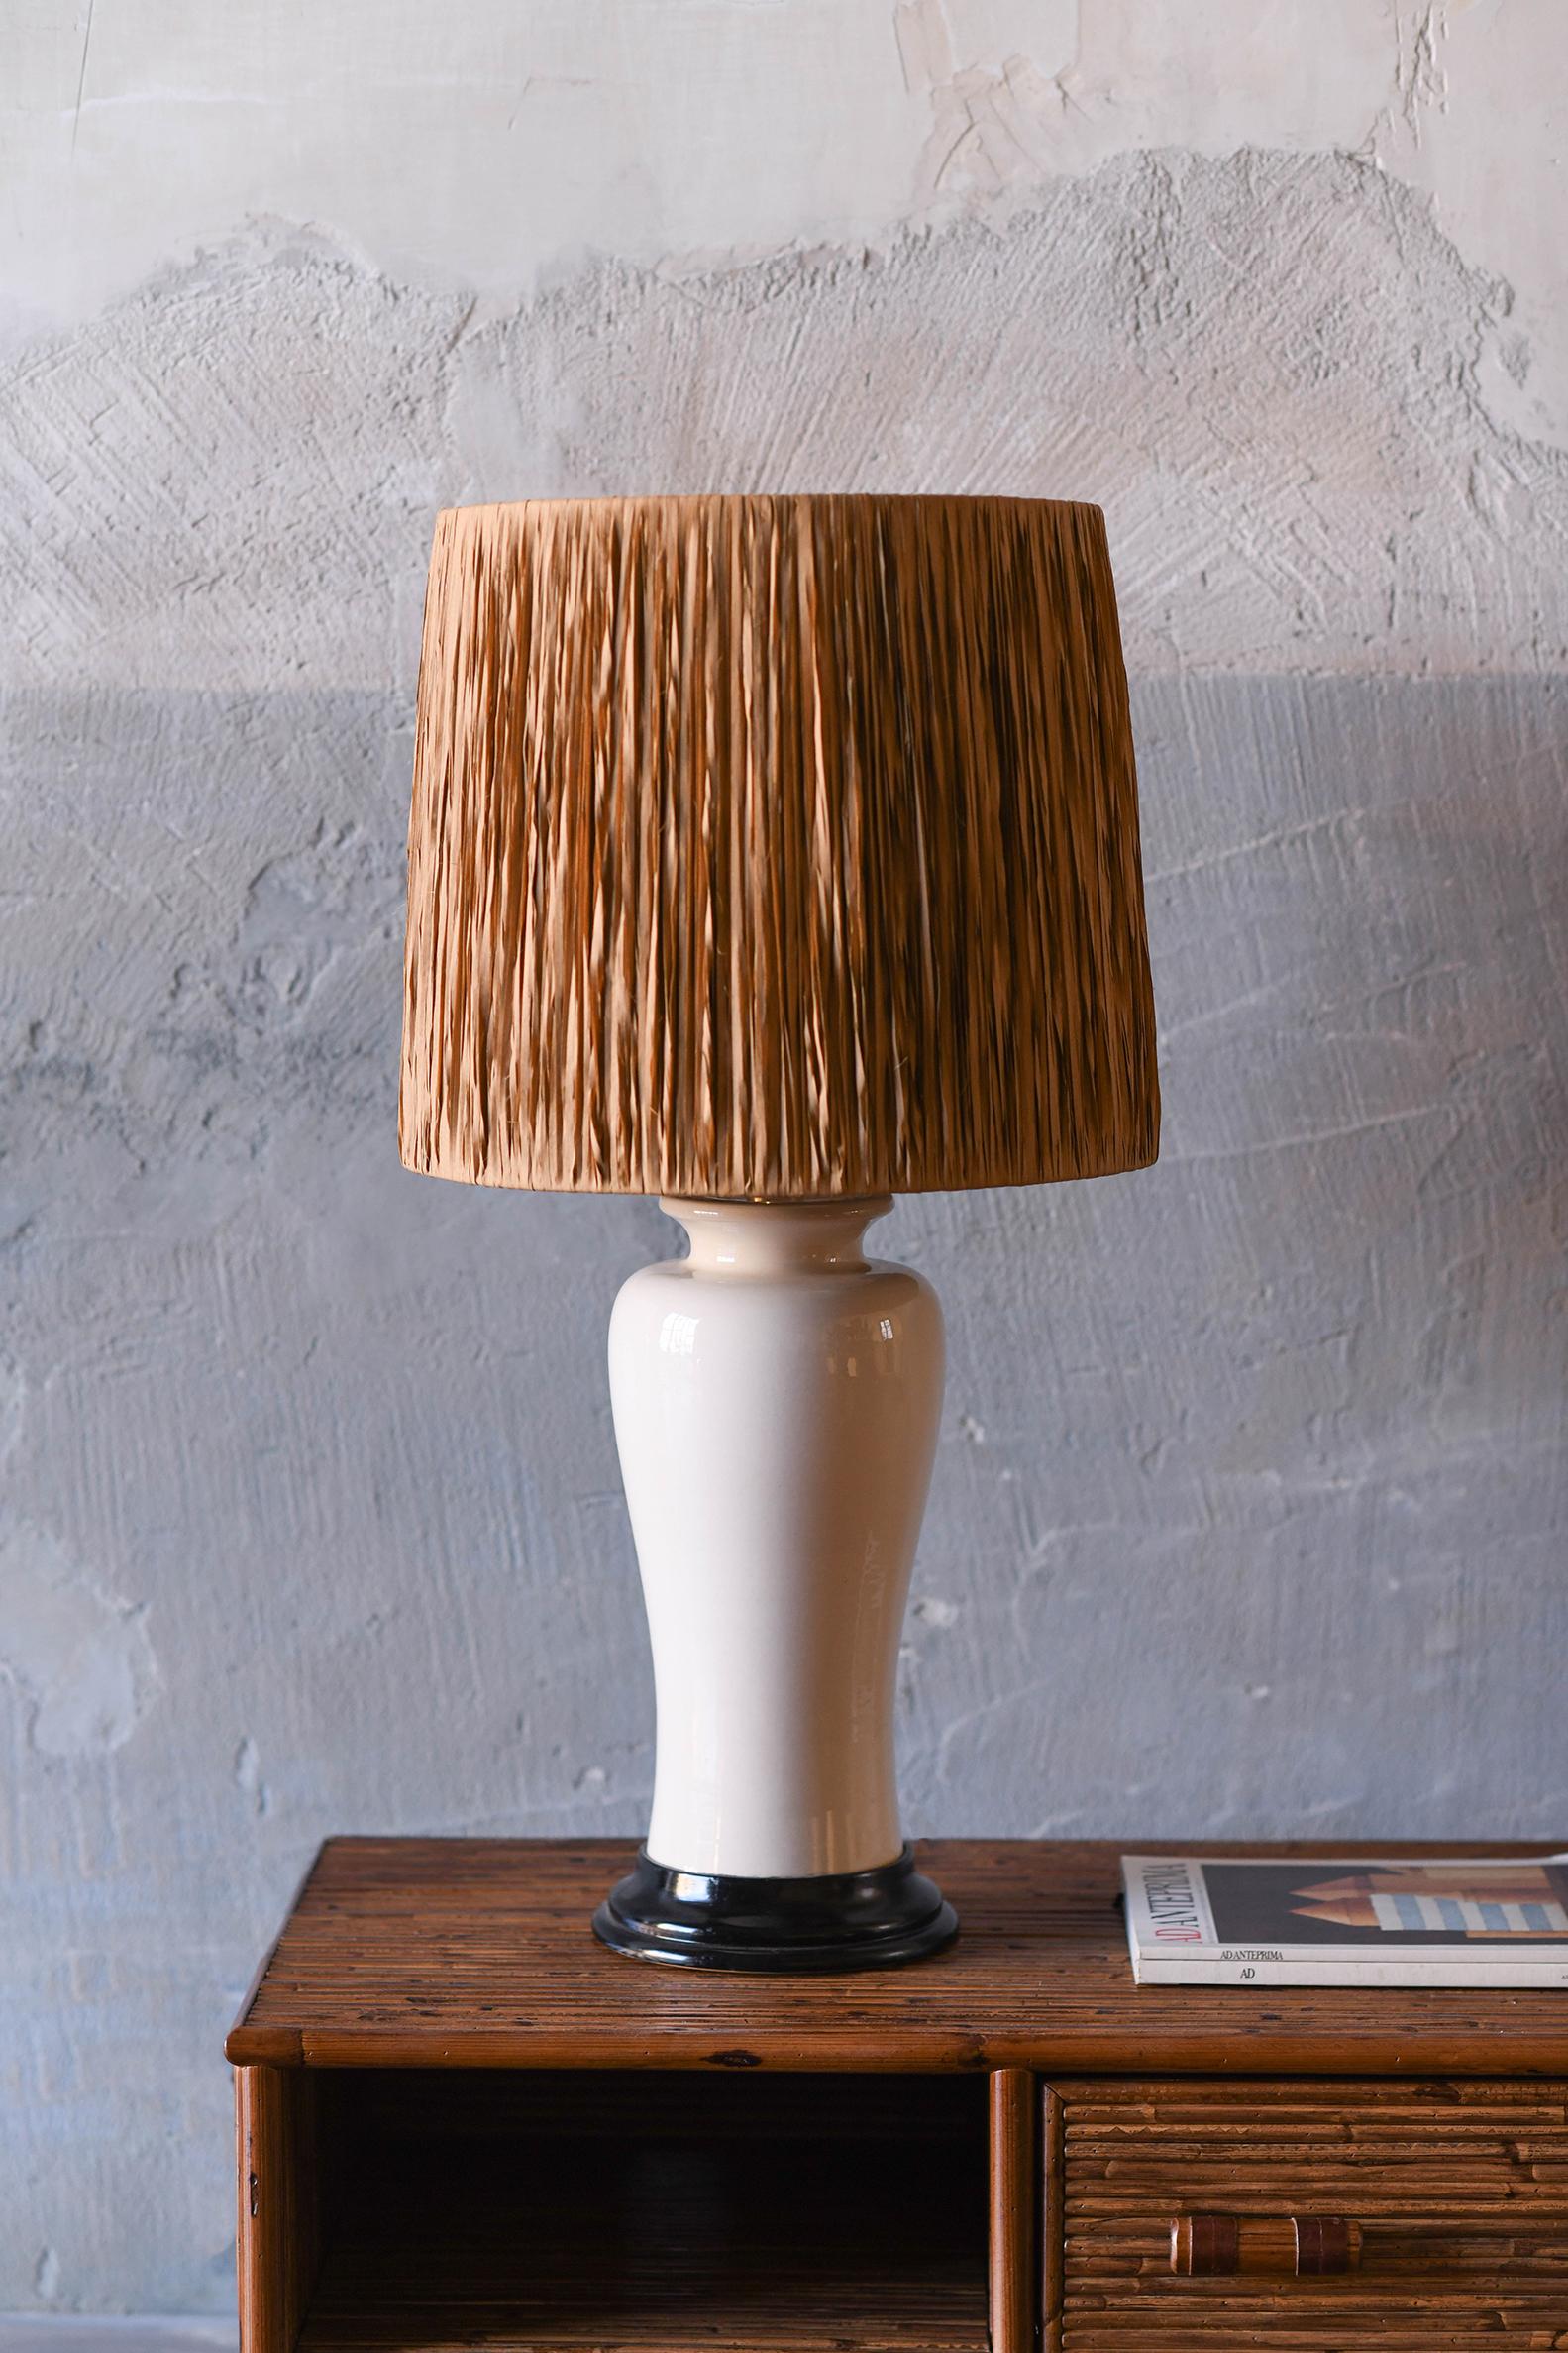 Tommaso Barbi table lamp in ceramic complete with raffia lampshade
Dimensions: 76.5 H x 35 D cm